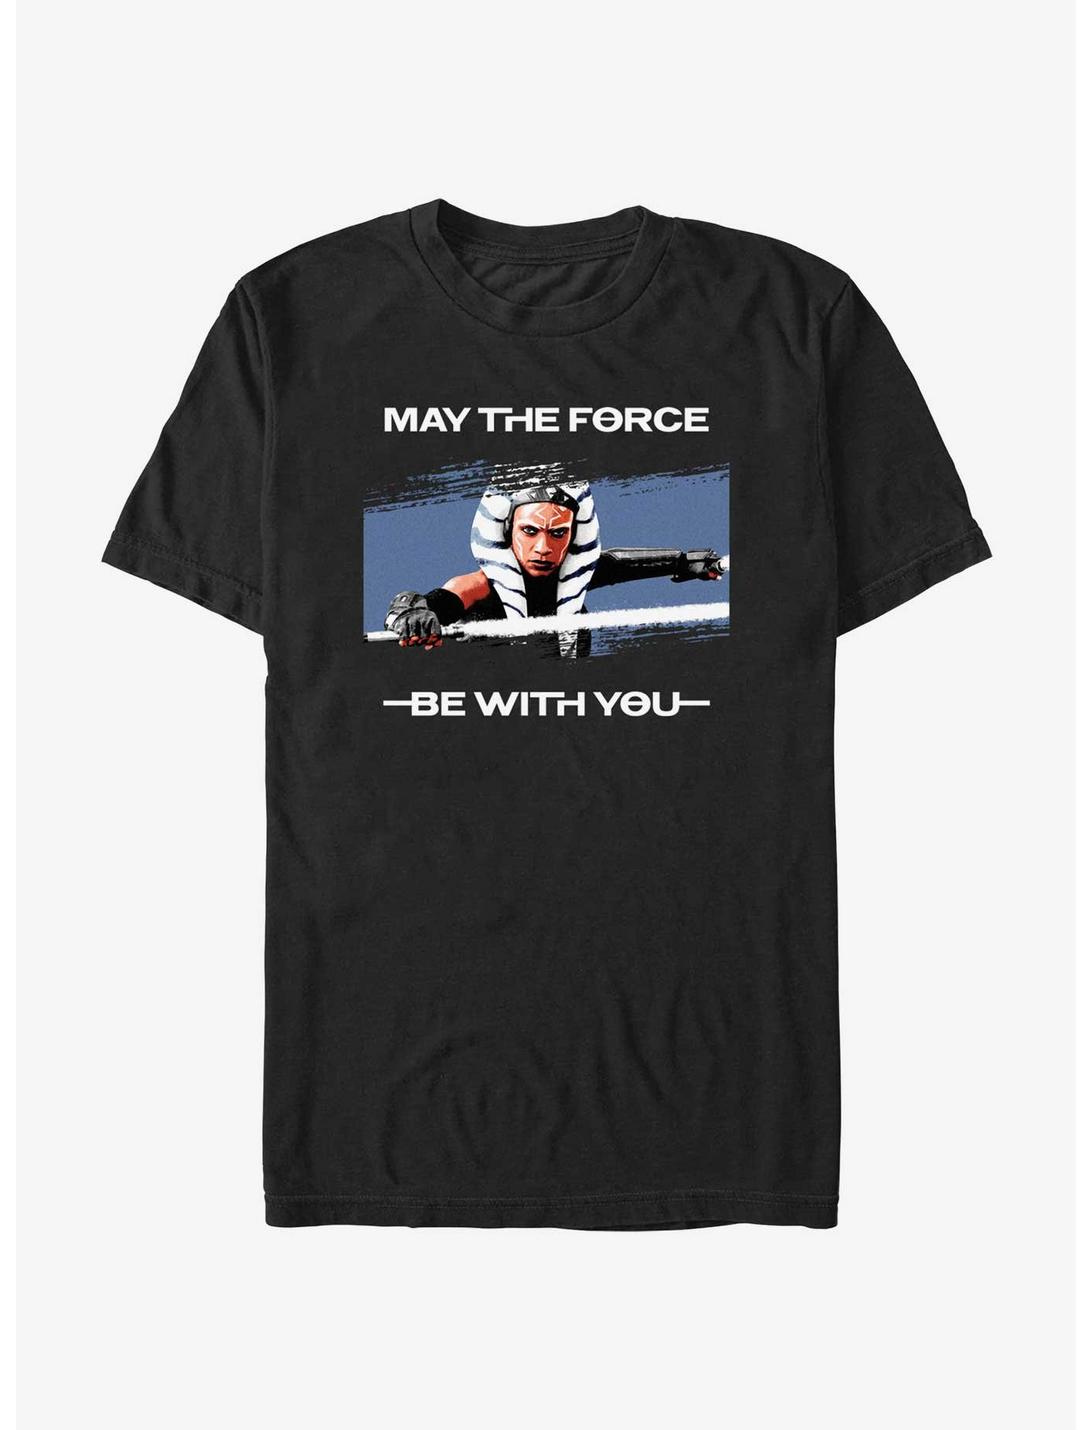 Star Wars Ahsoka May The Force Be With You Portrait T-Shirt, BLACK, hi-res